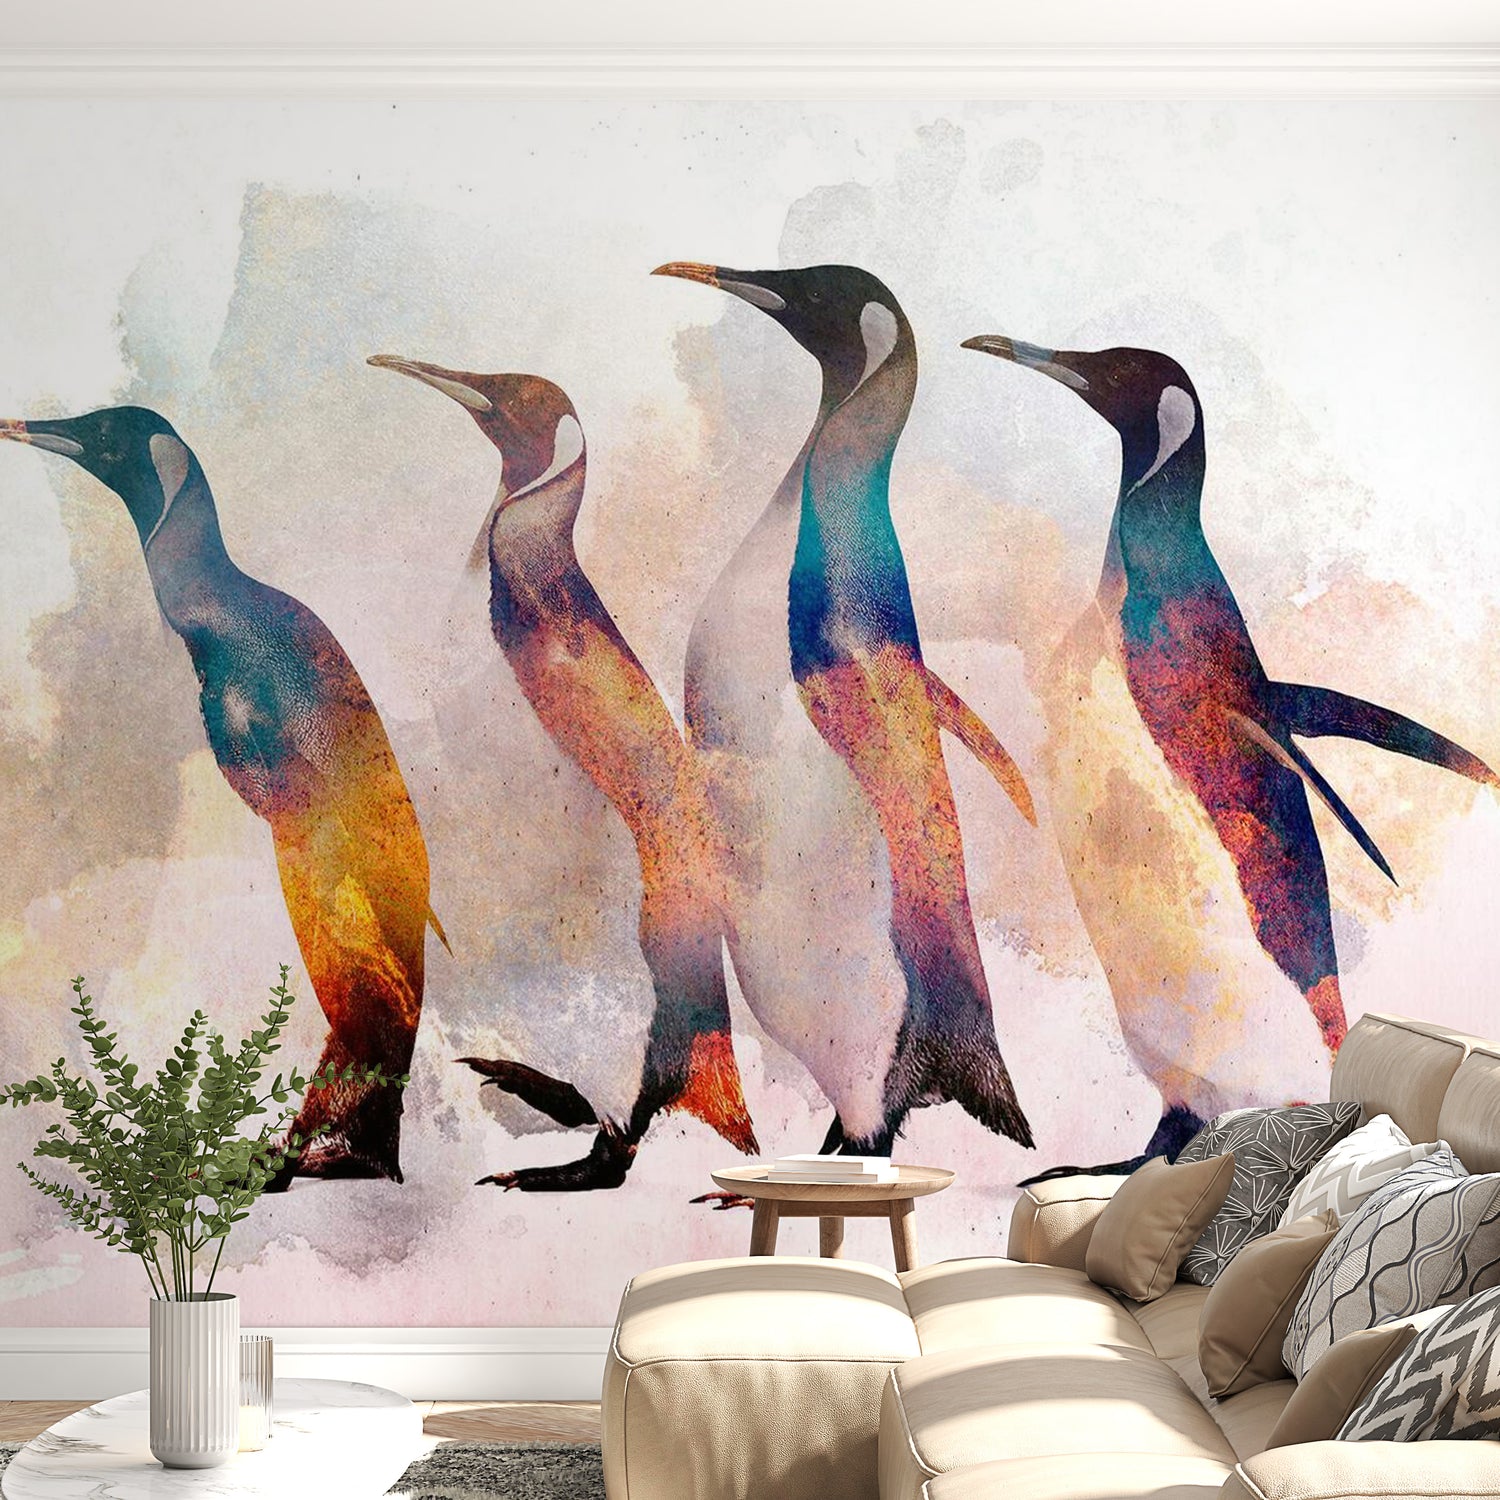 Peel & Stick Animal Wall Mural - Penguins Wandering - Removable Wall Decals